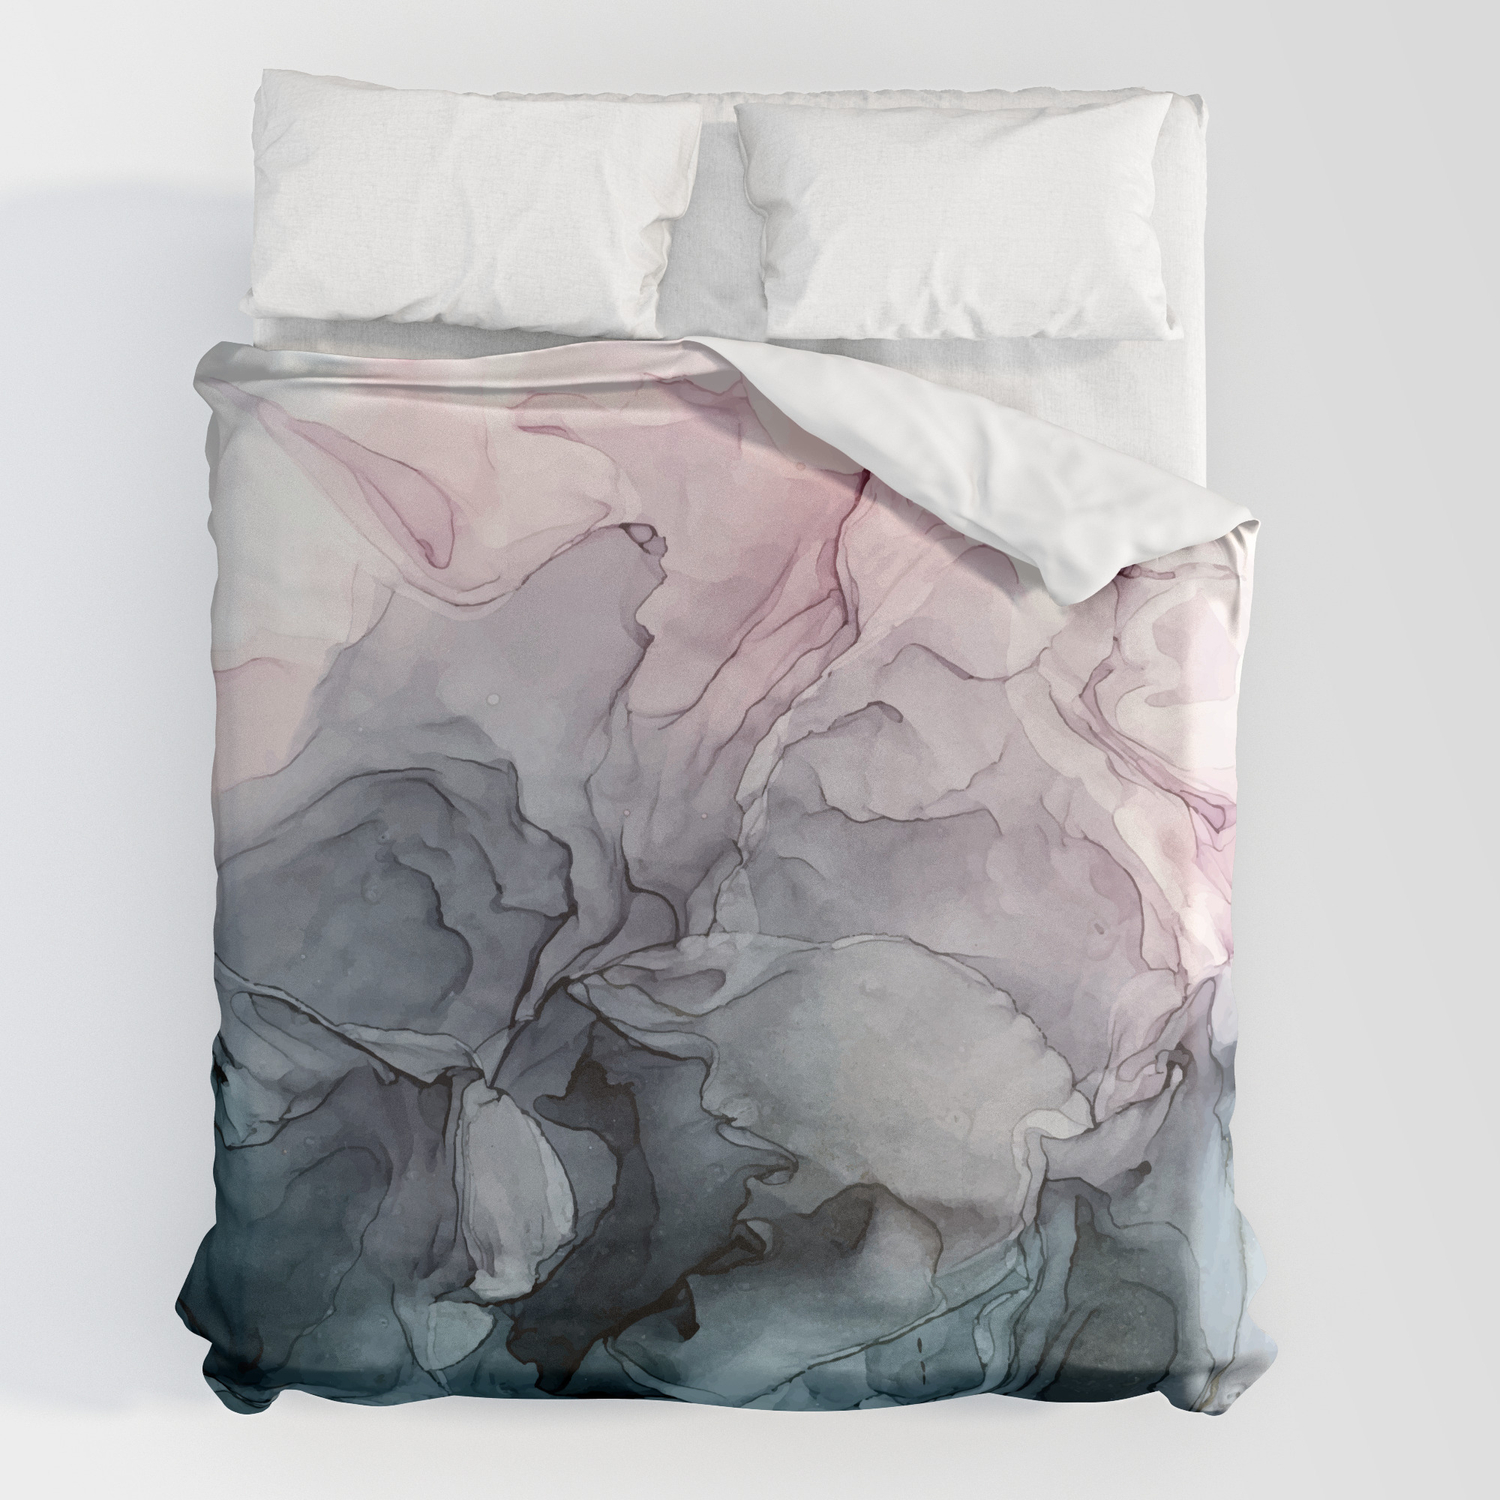 Blush And Payne S Grey Flowing Abstract, Blush Duvet Cover